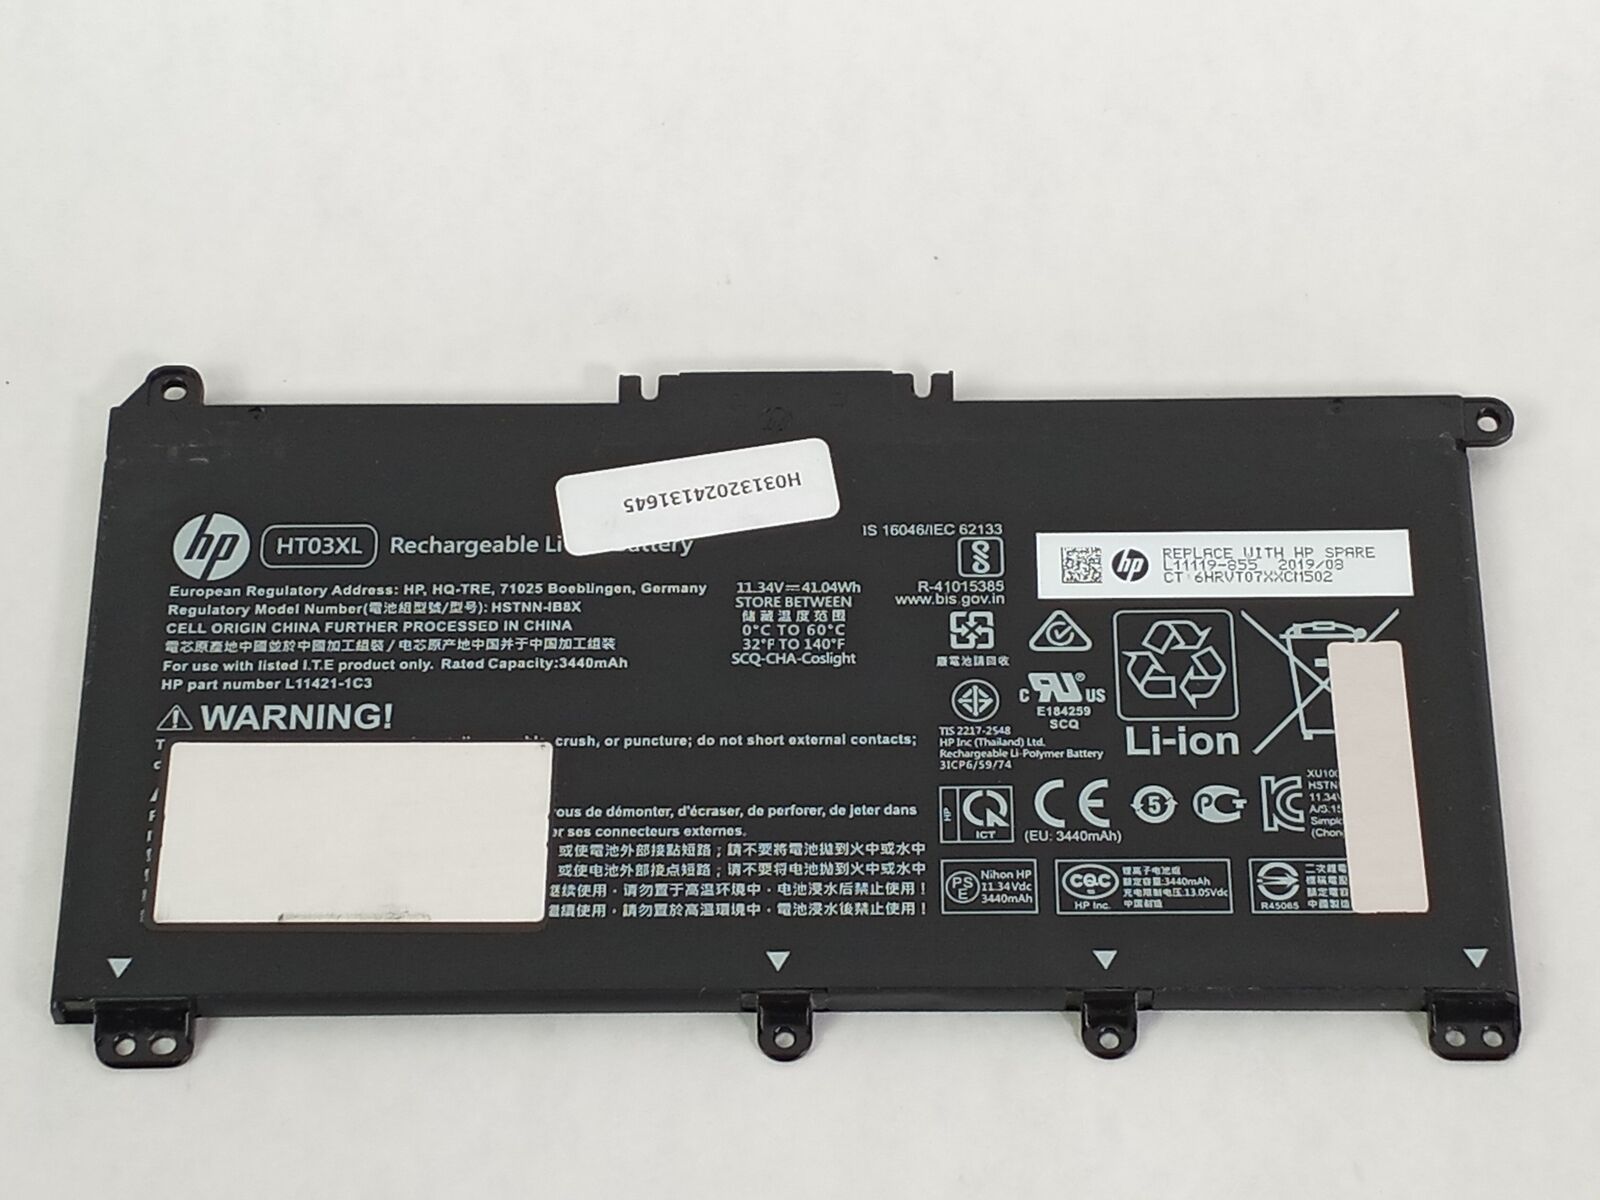 Lot of 2 HP L11119-855 3470mAh 3 Cell Laptop Battery for Pavilion 14 / 15